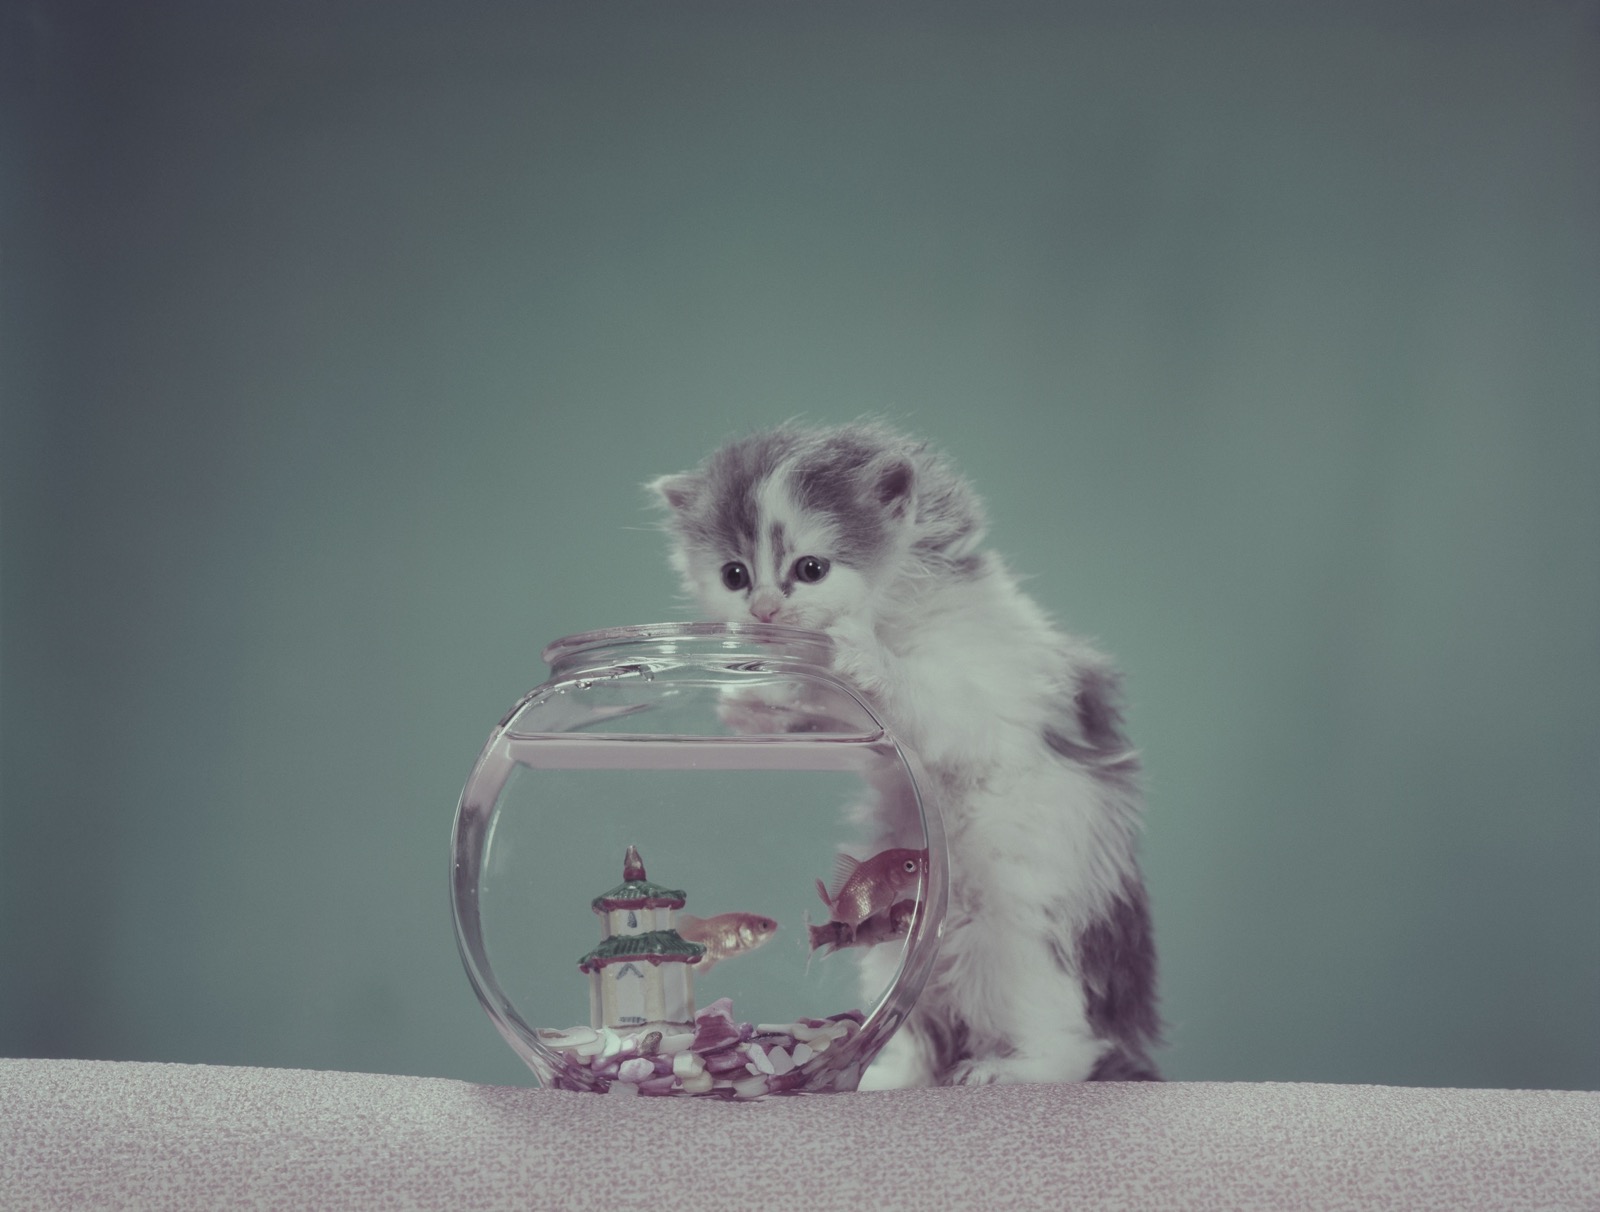 What Cat Personality Do You Have? Kitten fish bowl